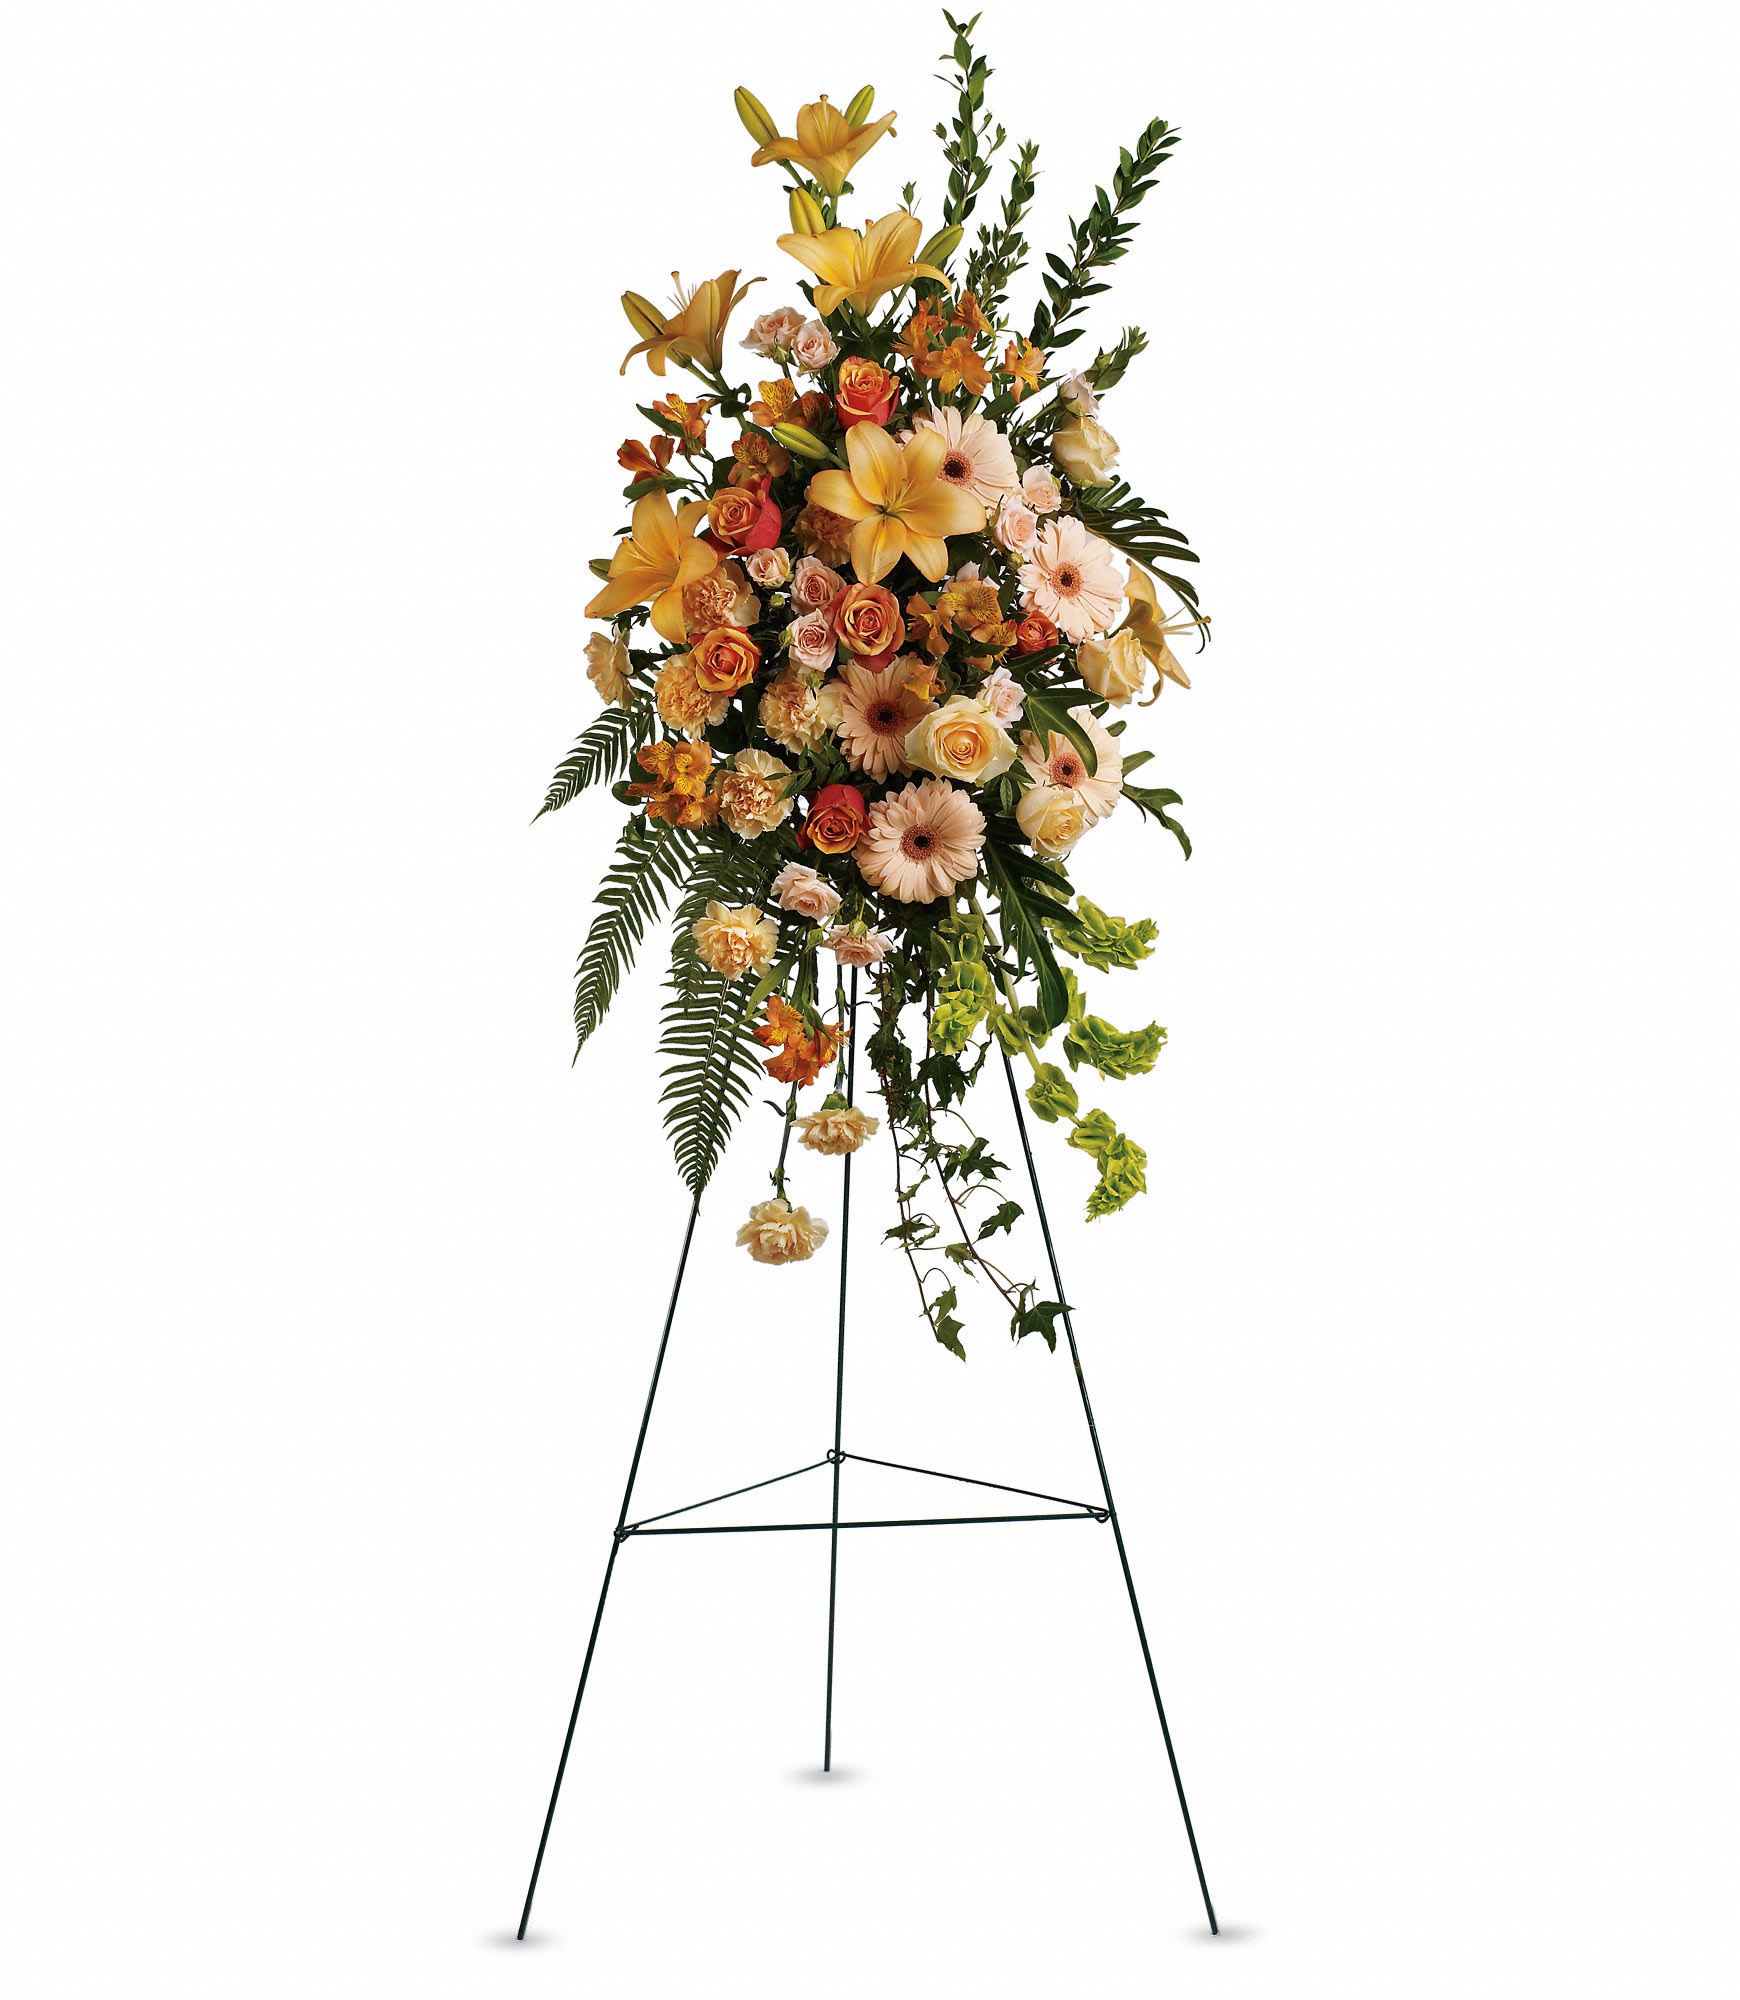 Sweet Remembrance Spray - The flowing, improvisational feeling expressed by this beautiful spray of pastel flowers is like an outpouring of love. It will be long-remembered. 